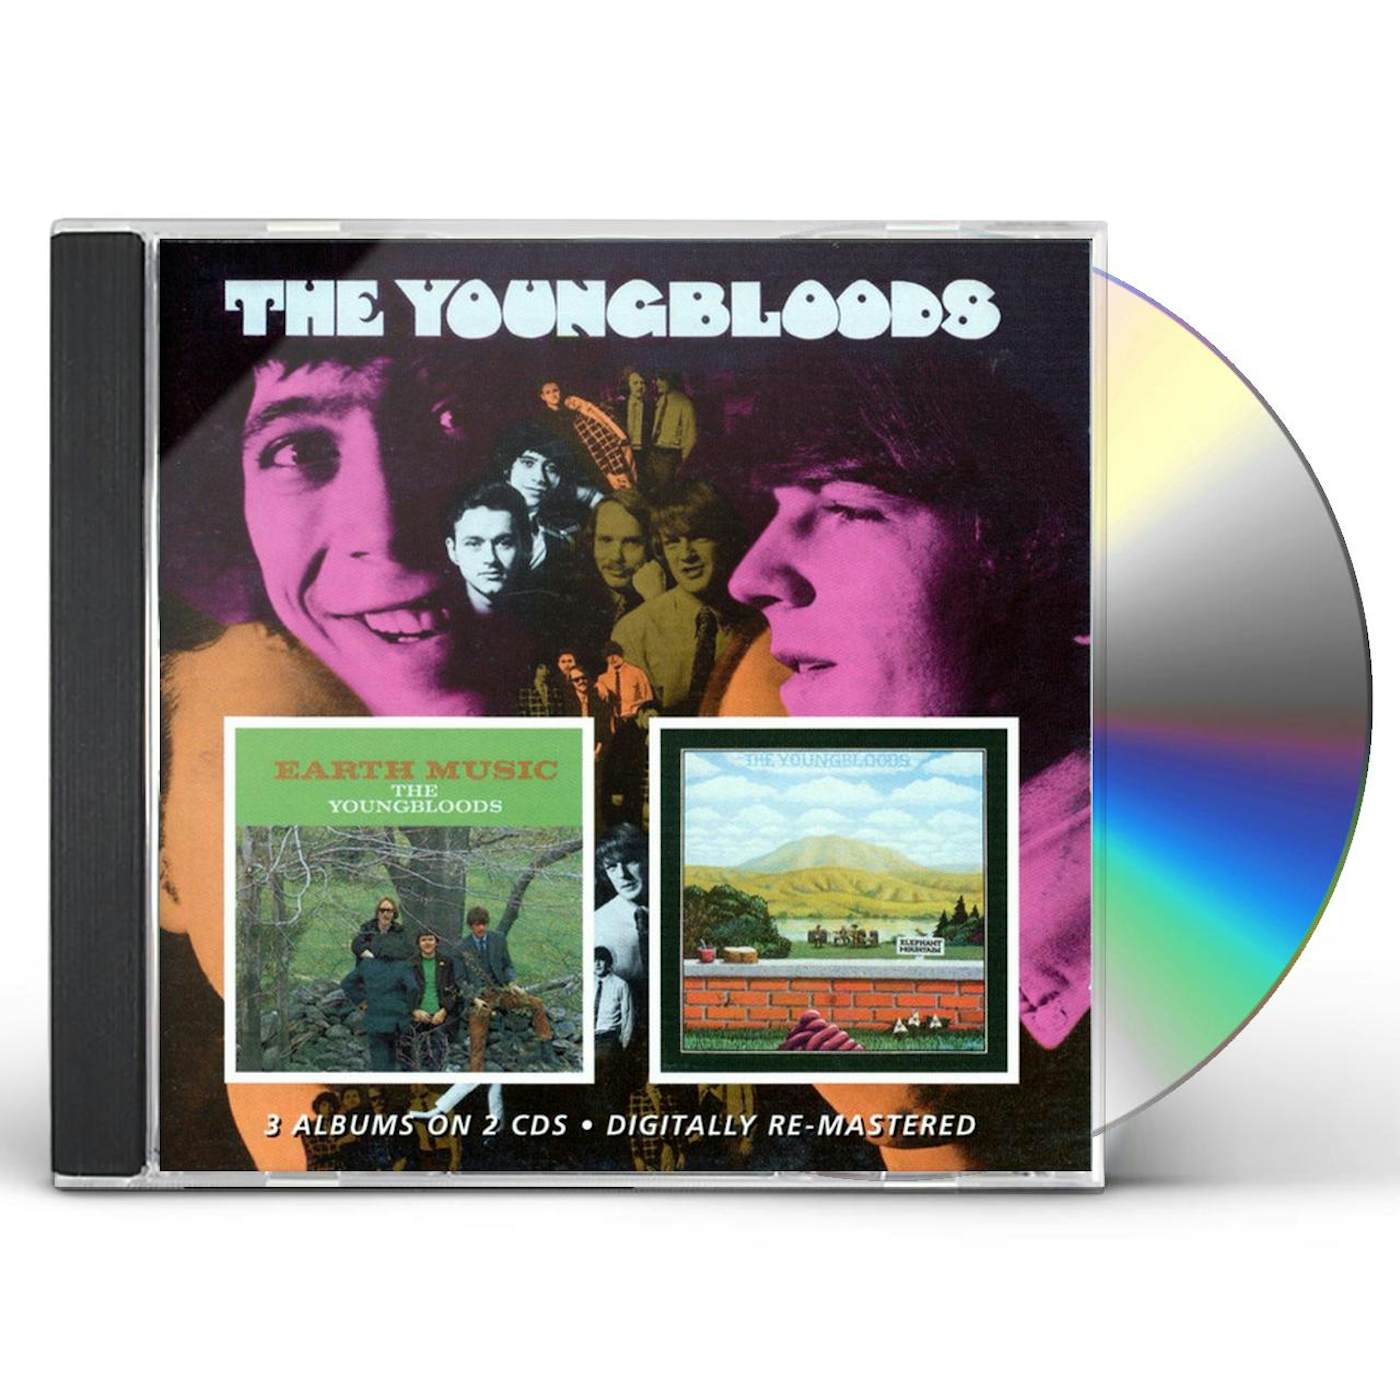 The Youngbloods / EARTH MUSIC / ELEPHANT MOUNTAIN (REMASTERED) CD